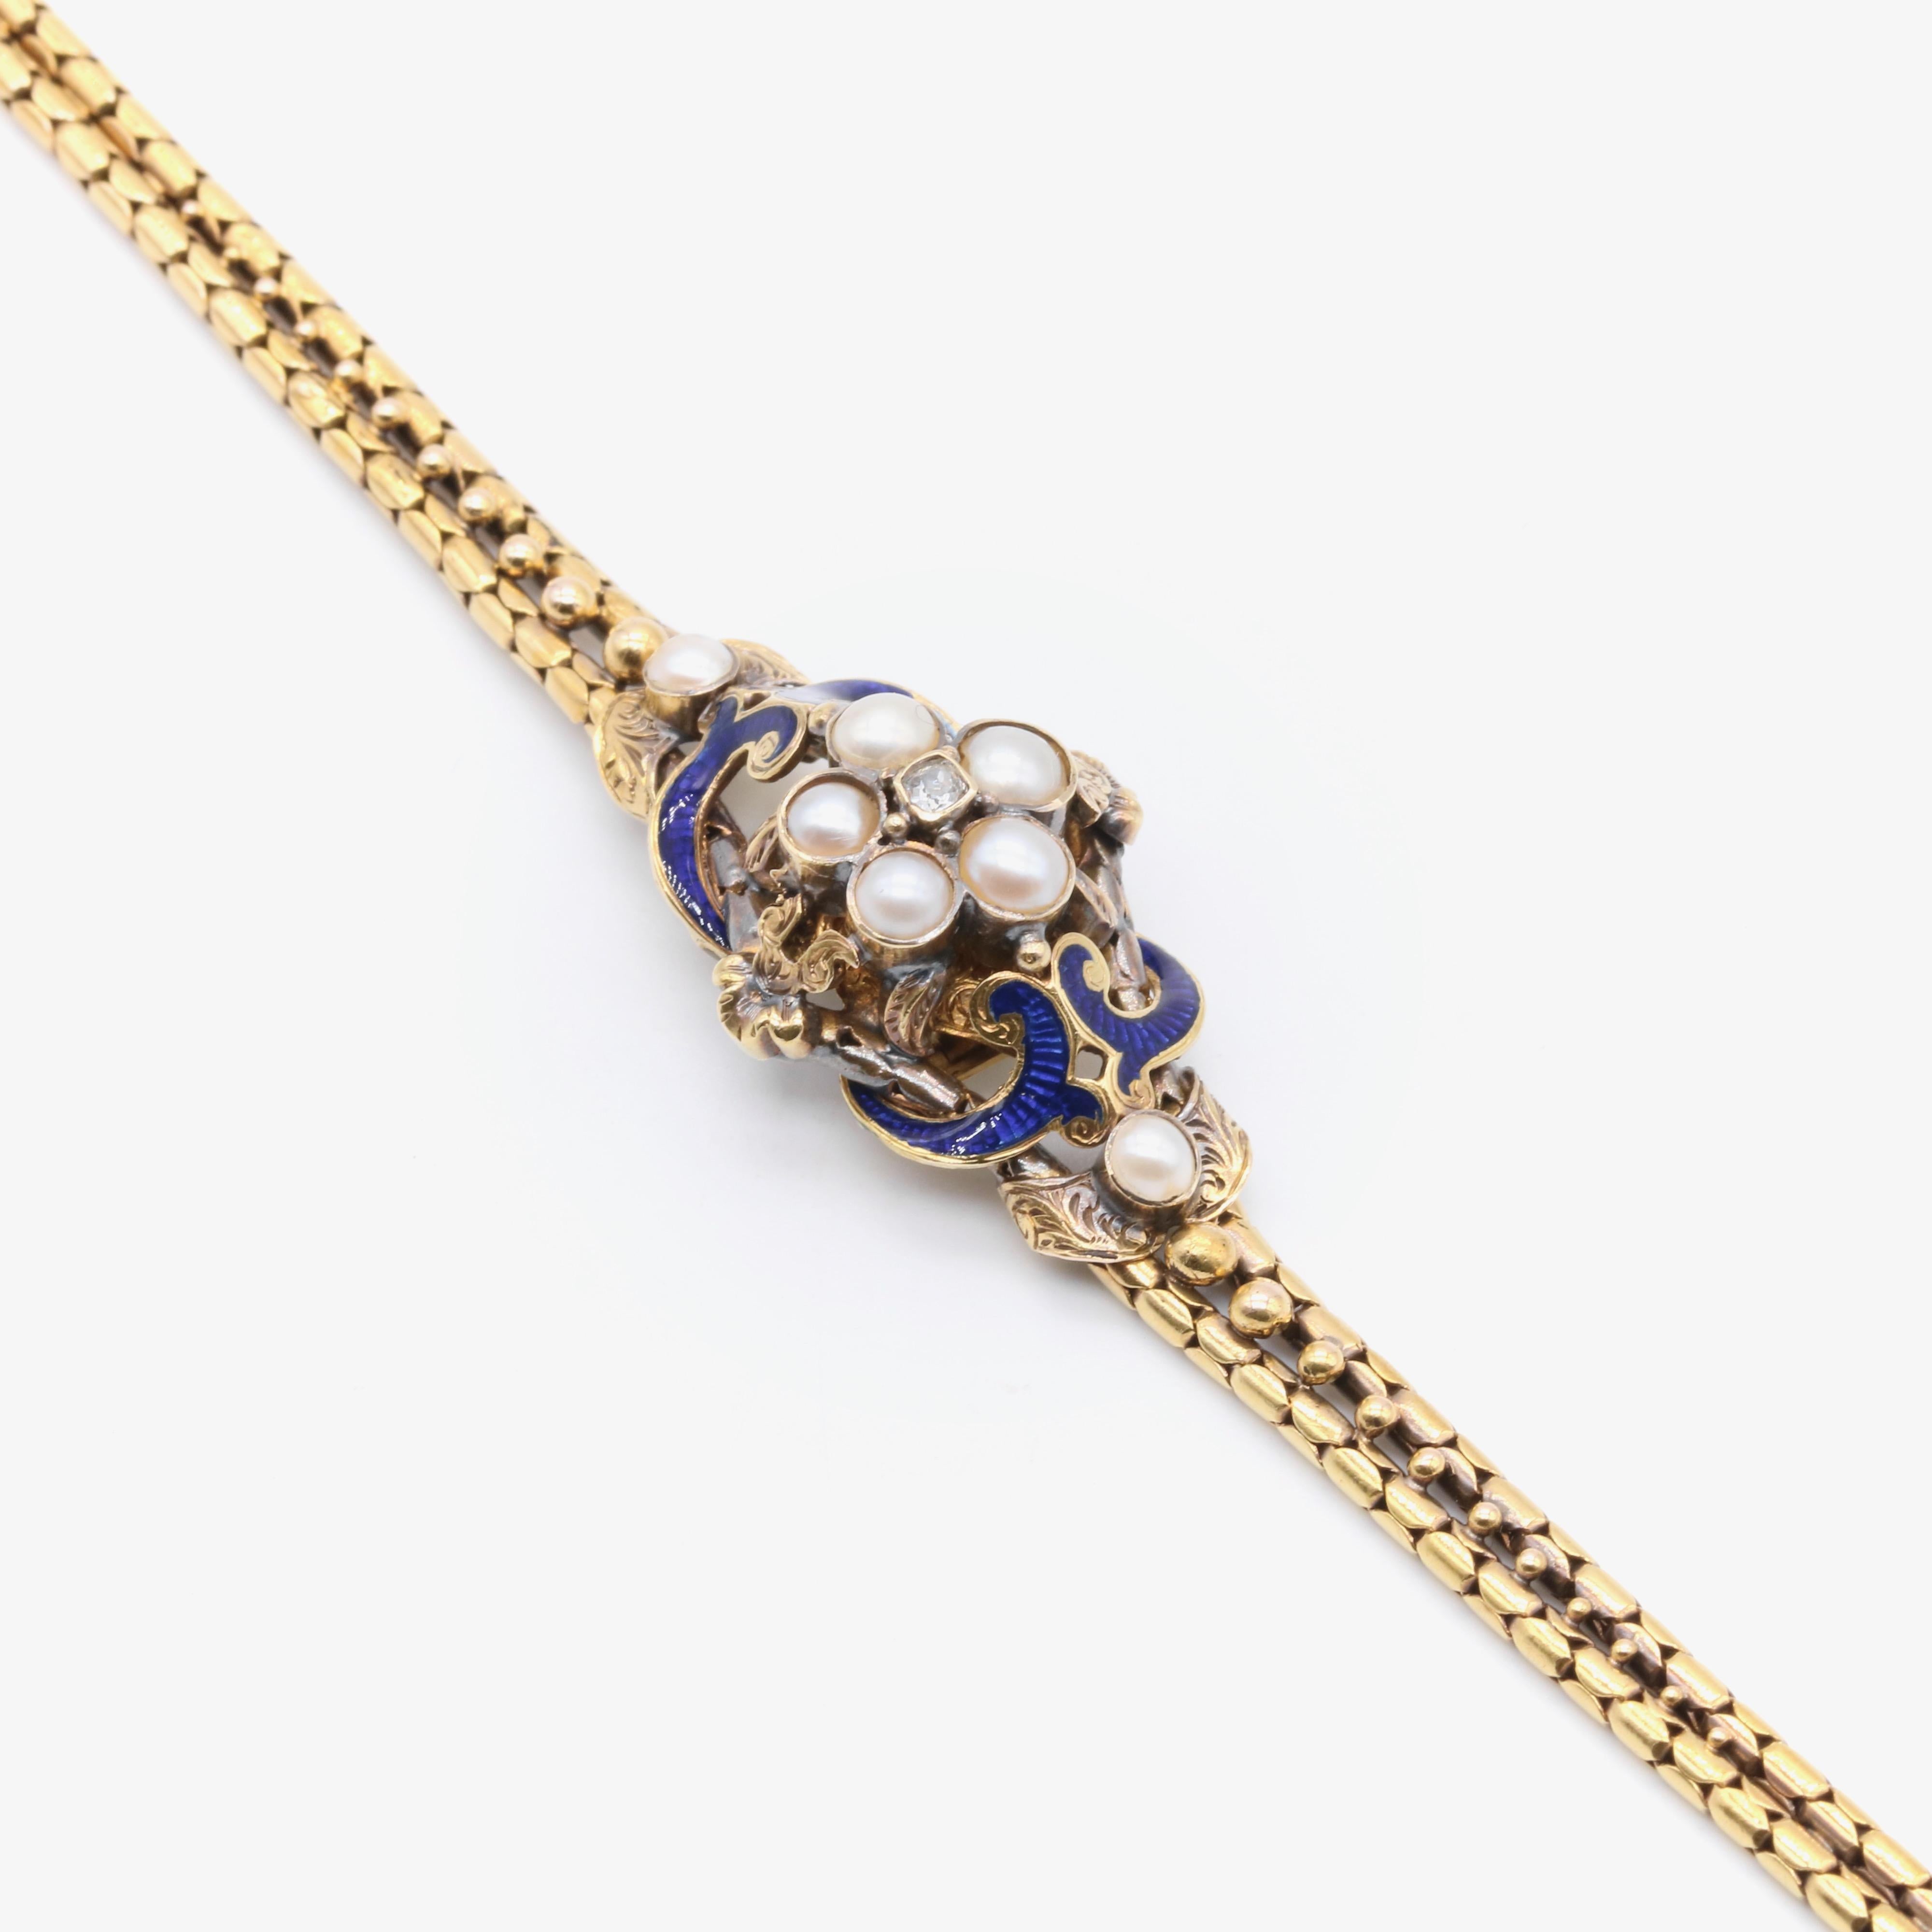 Antique Victorian 18K Gold Diamond, Pearl & Blue Enamel Engraved Bracelet In Good Condition For Sale In Staines-Upon-Thames, GB